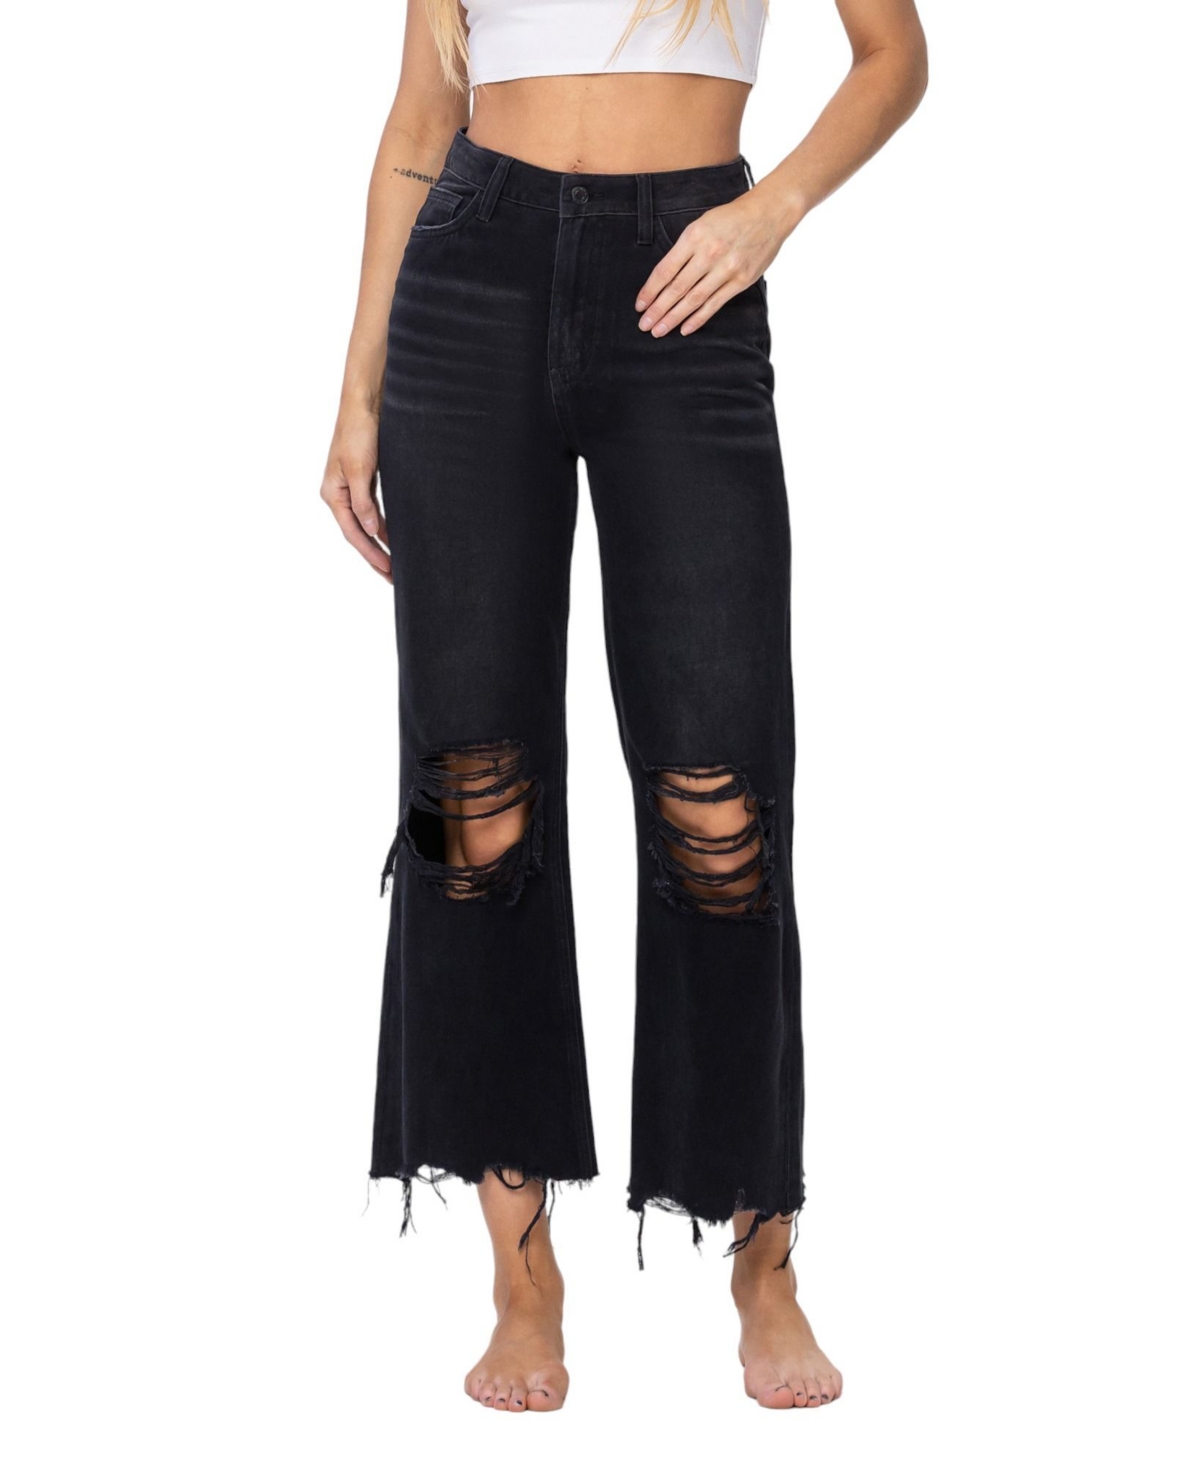 Women's Super High Rise 90's Vintage-like Cropped Flare Jeans - Black